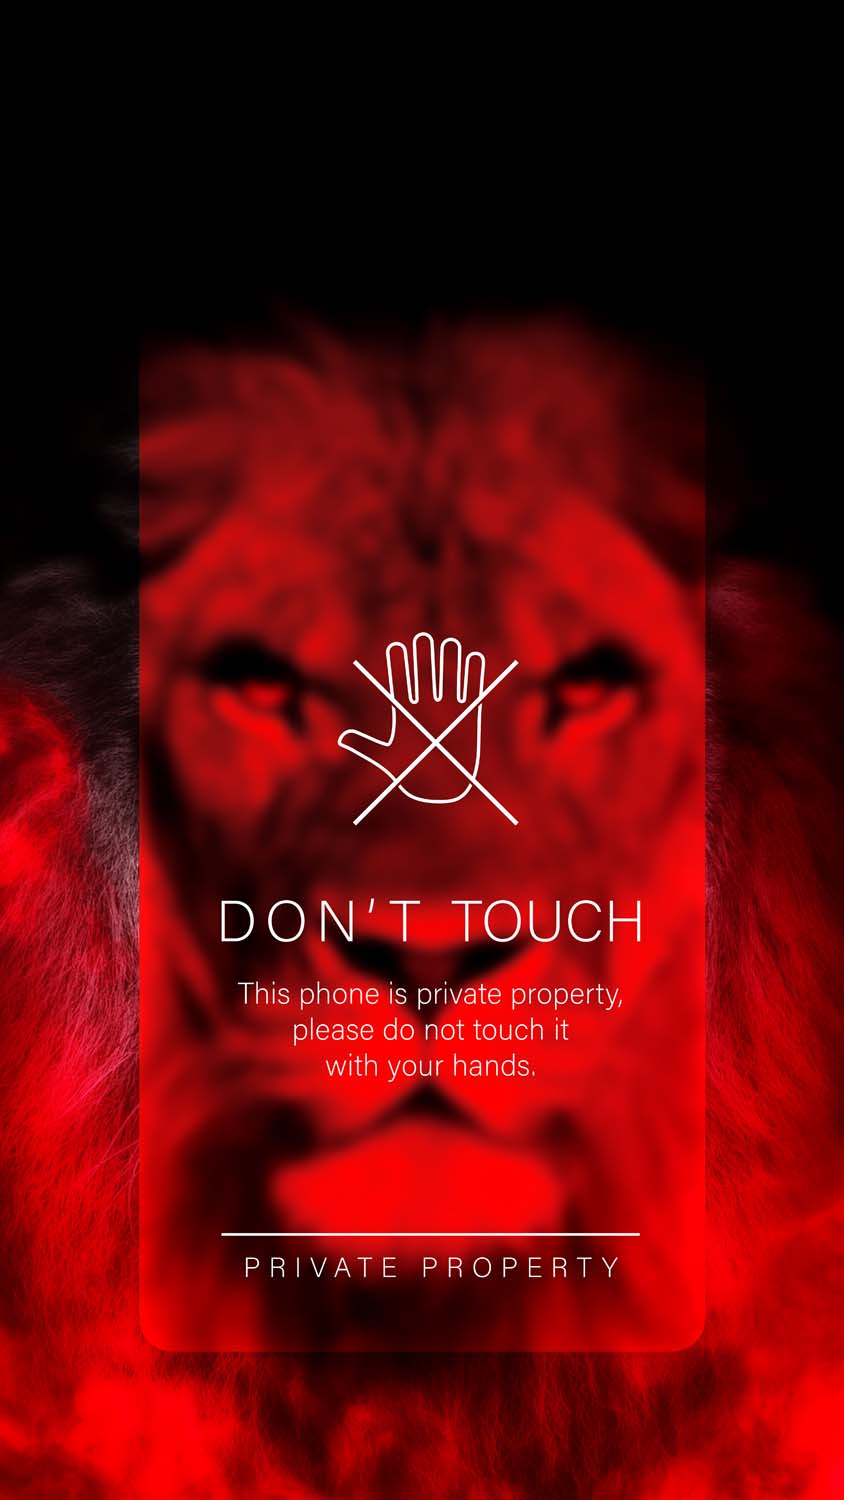 Do Not Touch Warning iPhone Wallpaper HD